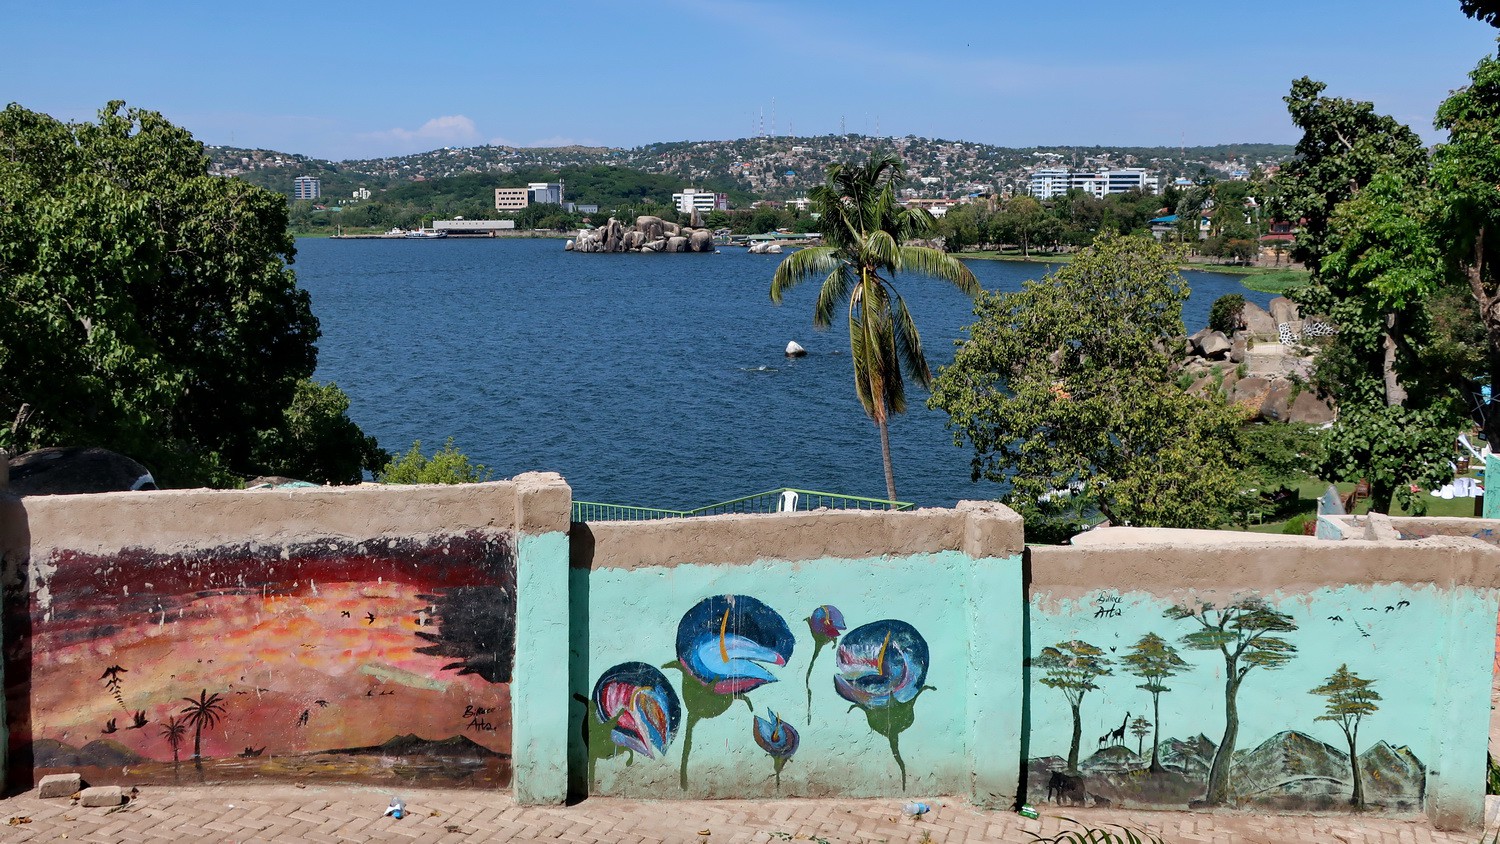 More murals with Mwanza in the background